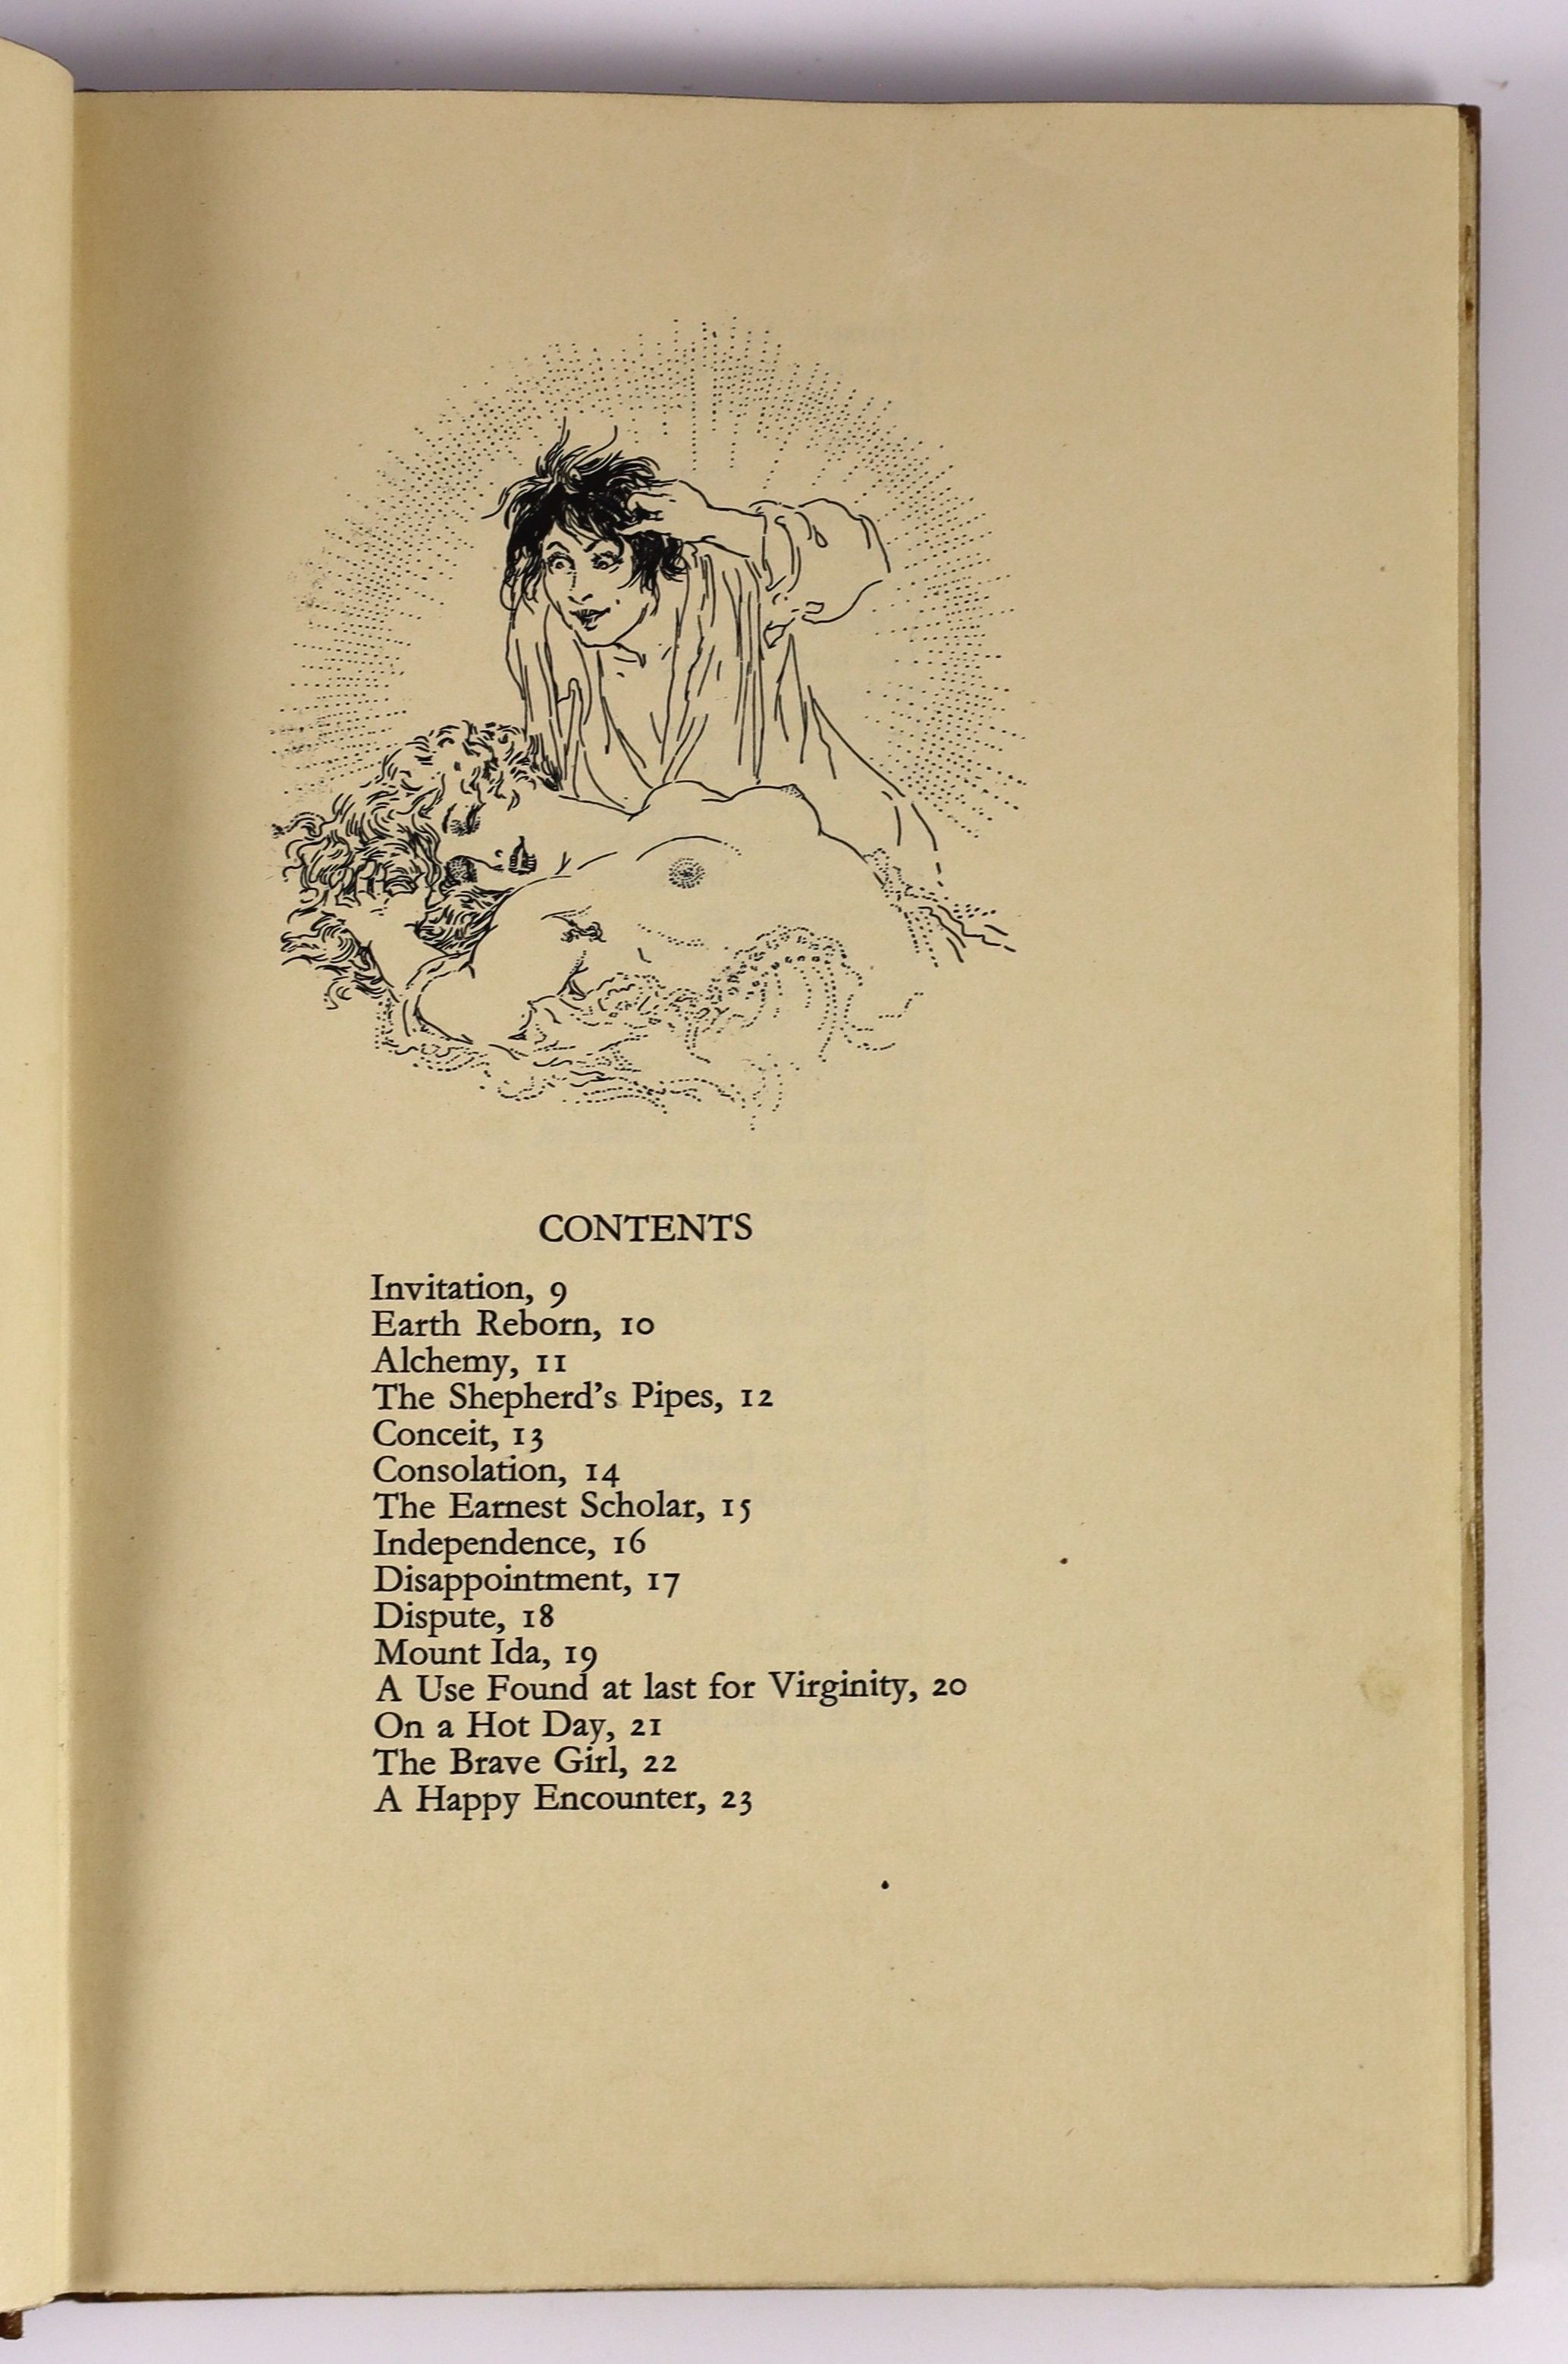 Lindsay, Jack - The Passionate Neatherd a Lyric Sequence, number 5 of 50 signed copies on japan vellum, 4to, illustrated by Norman Lindsay, The Franfrolic Press, London, [1926]